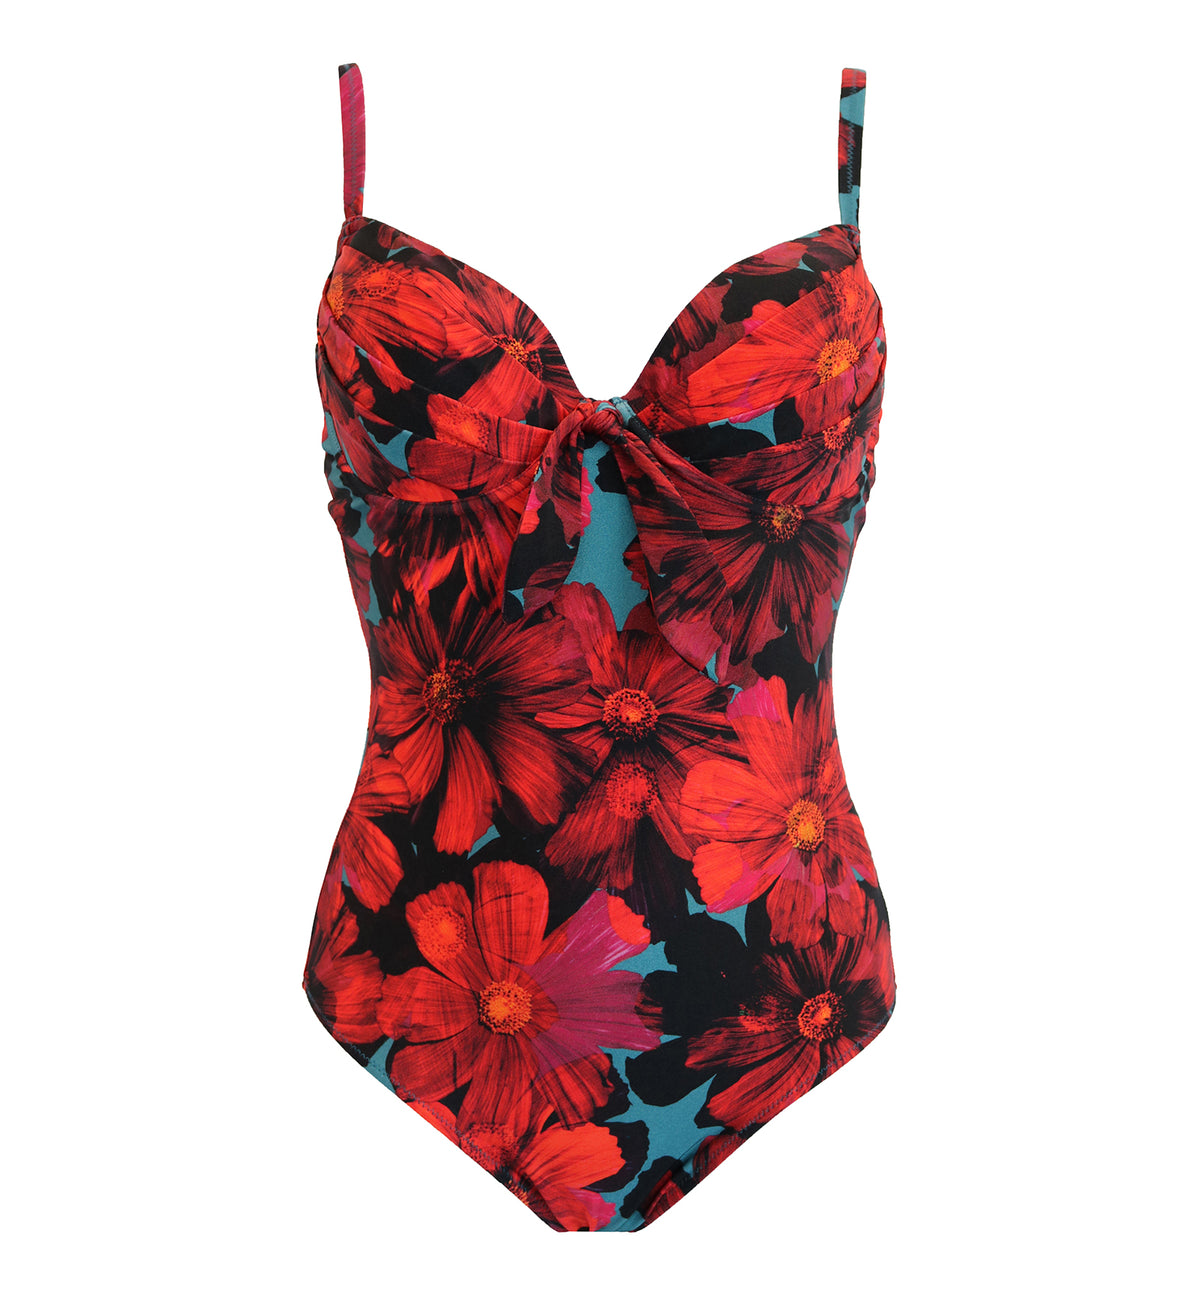 Pour Moi Orchid Luxe Padded Underwire Swimsuit (12907),32E,Red/Teal - Red/Teal,32E